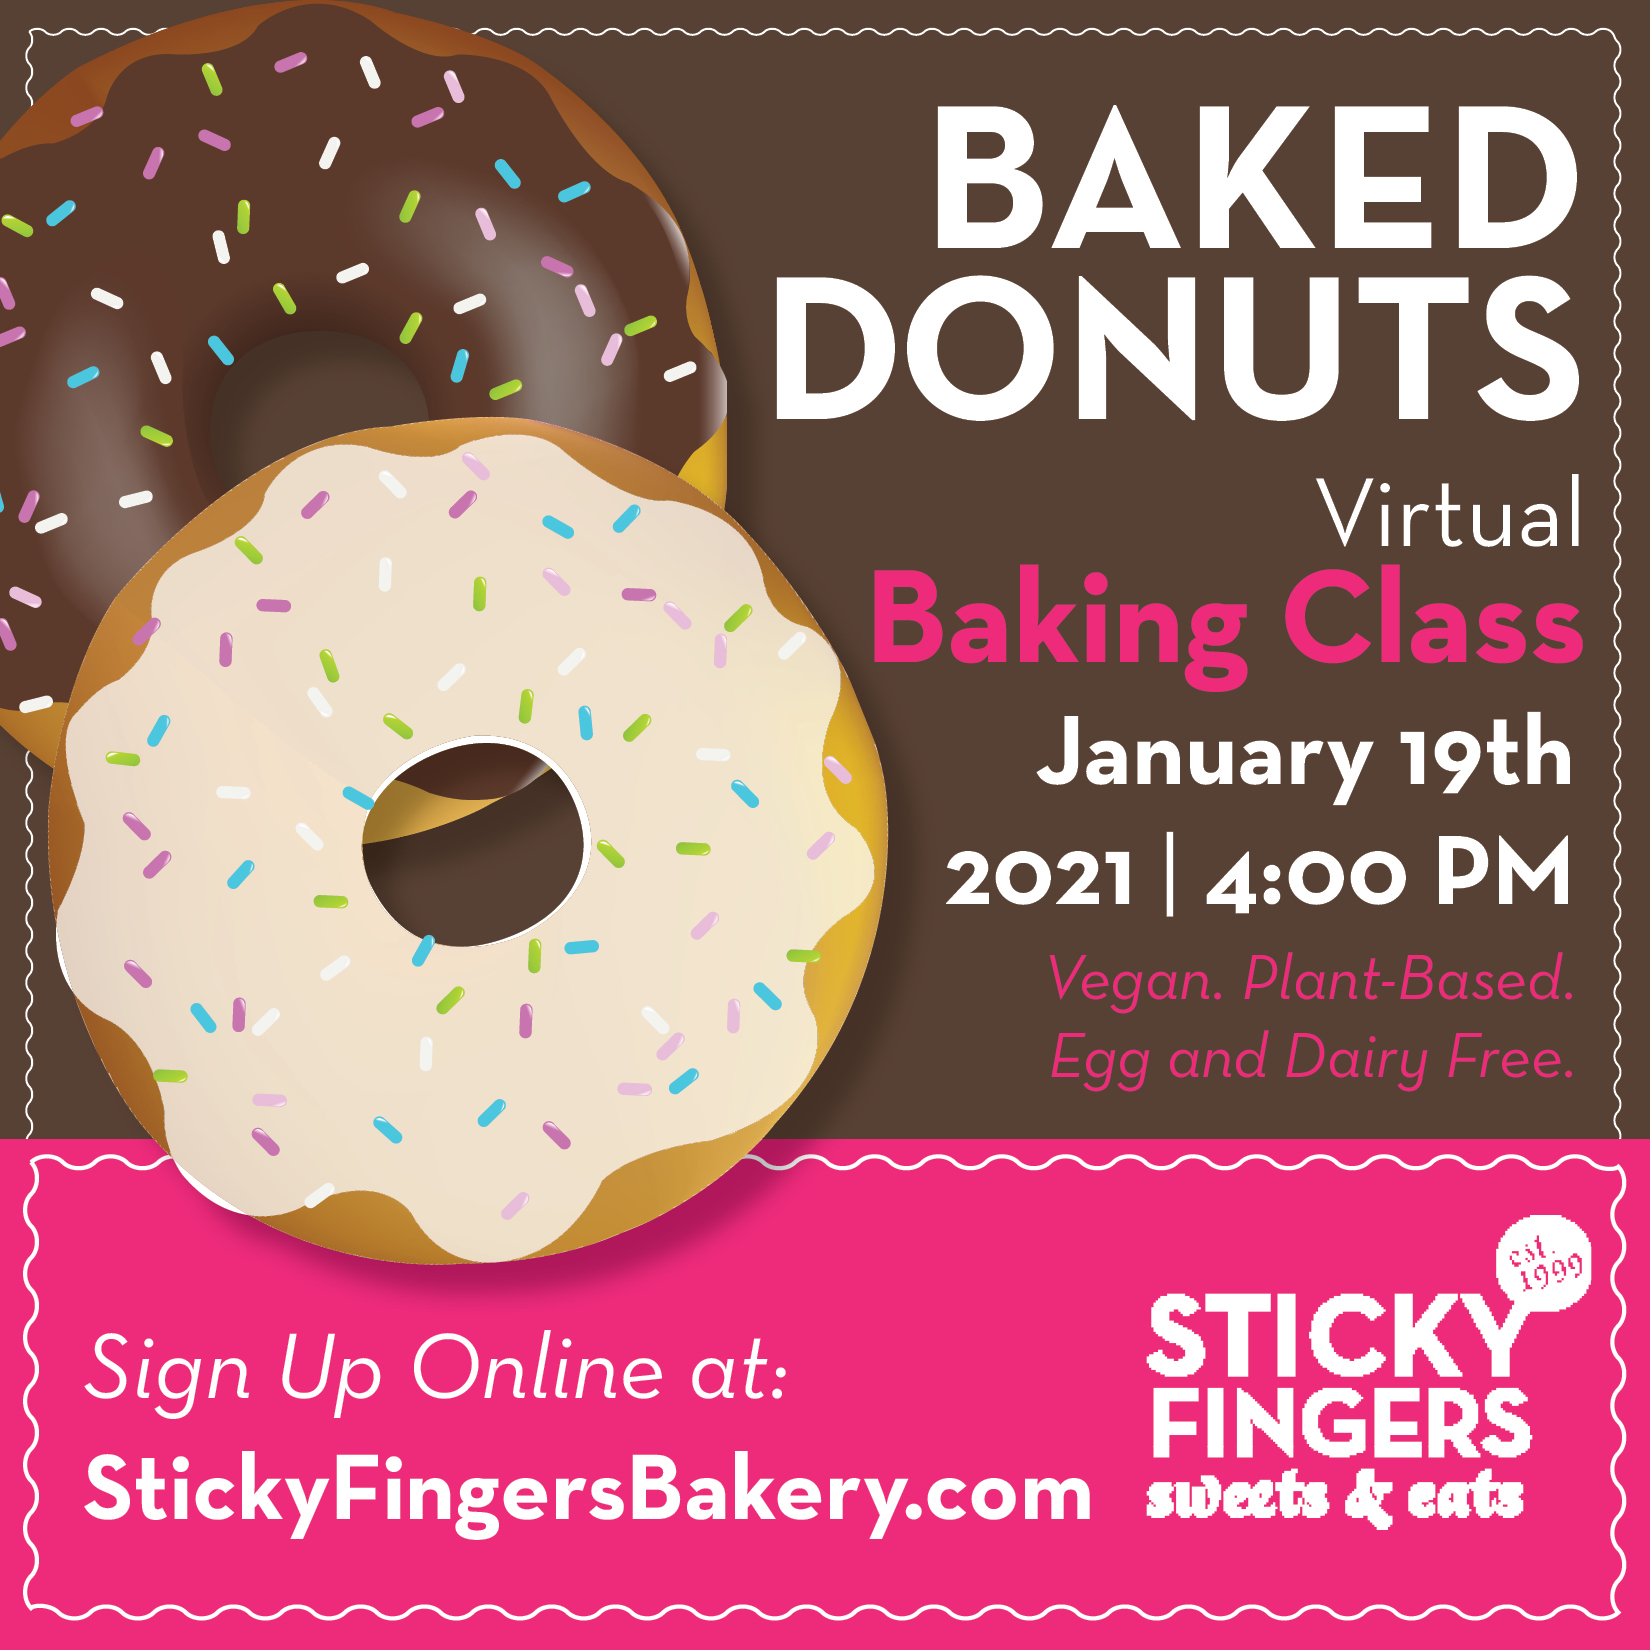 Sticky Fingers Bakery Online Baked Donuts Class